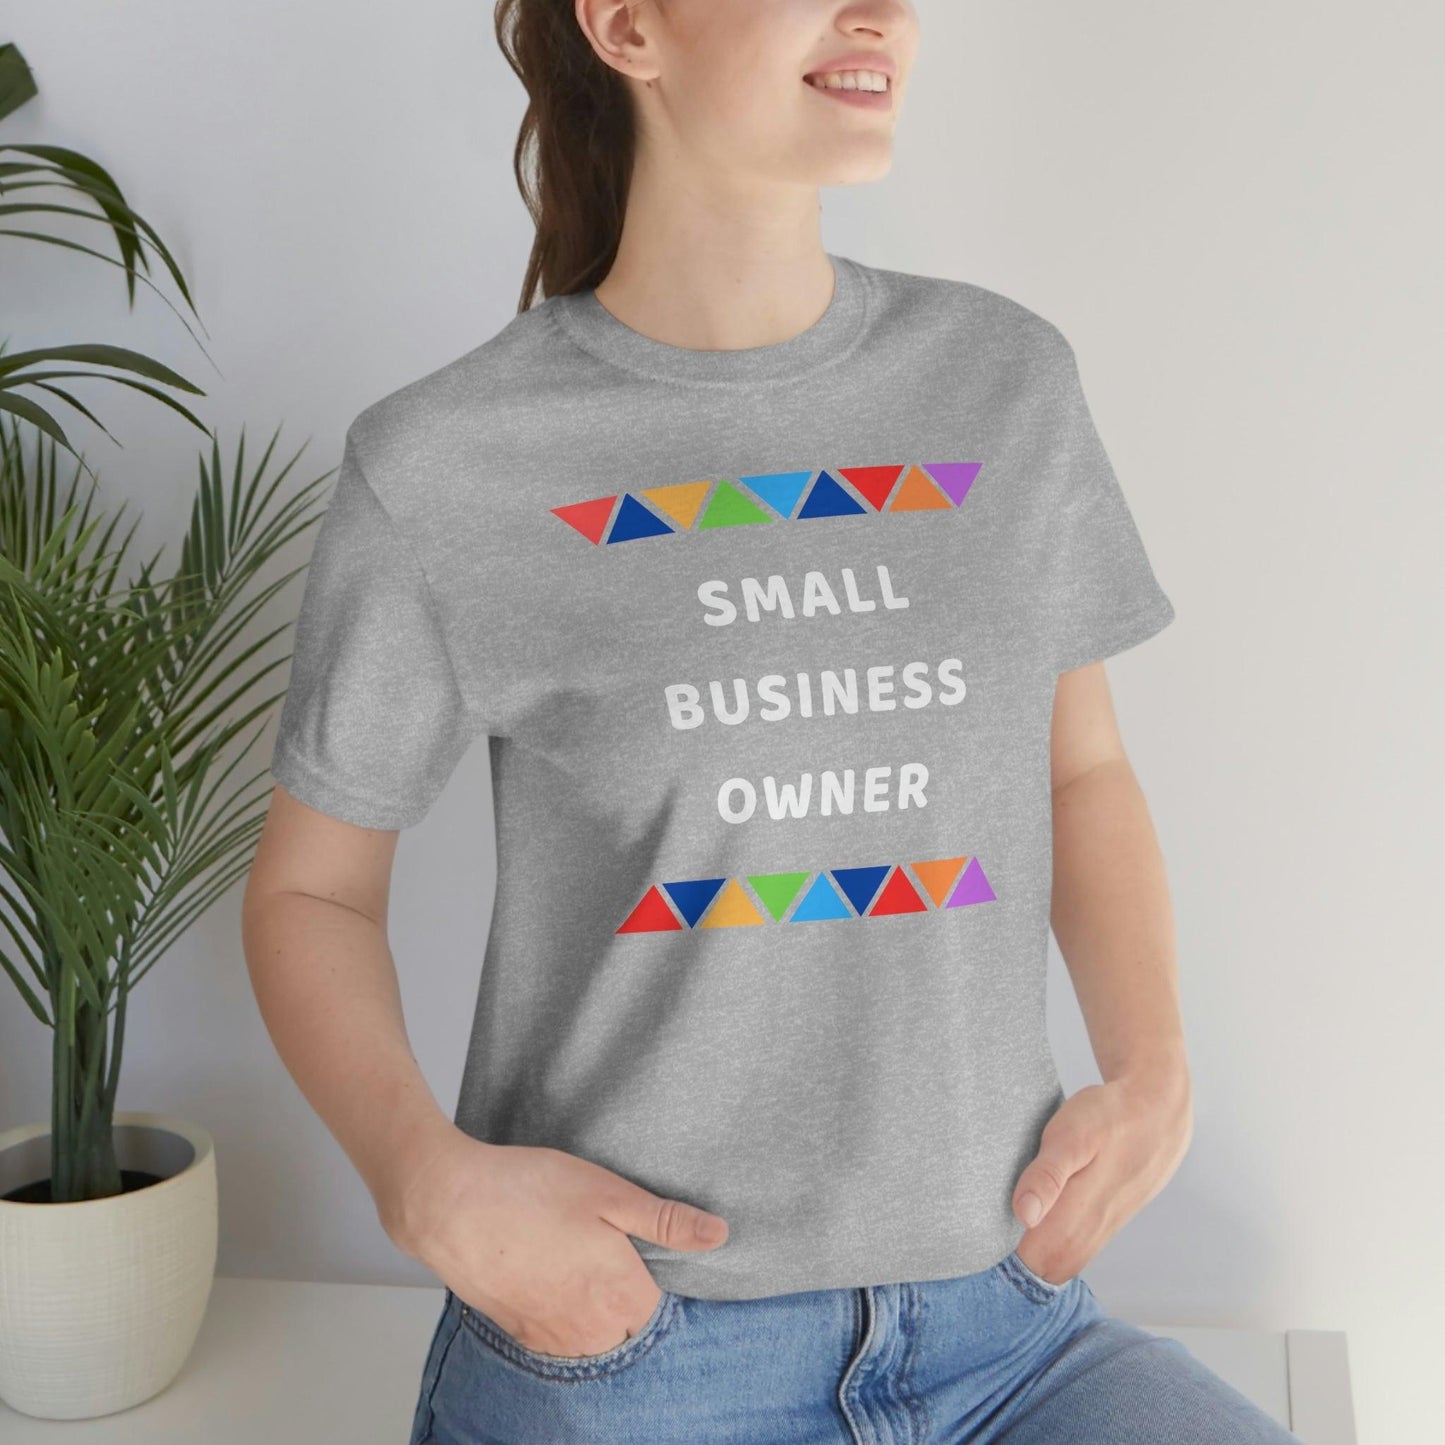 small business shirt, business owner gift, small business t-shirt, business owner t shirt, startup business shirt,